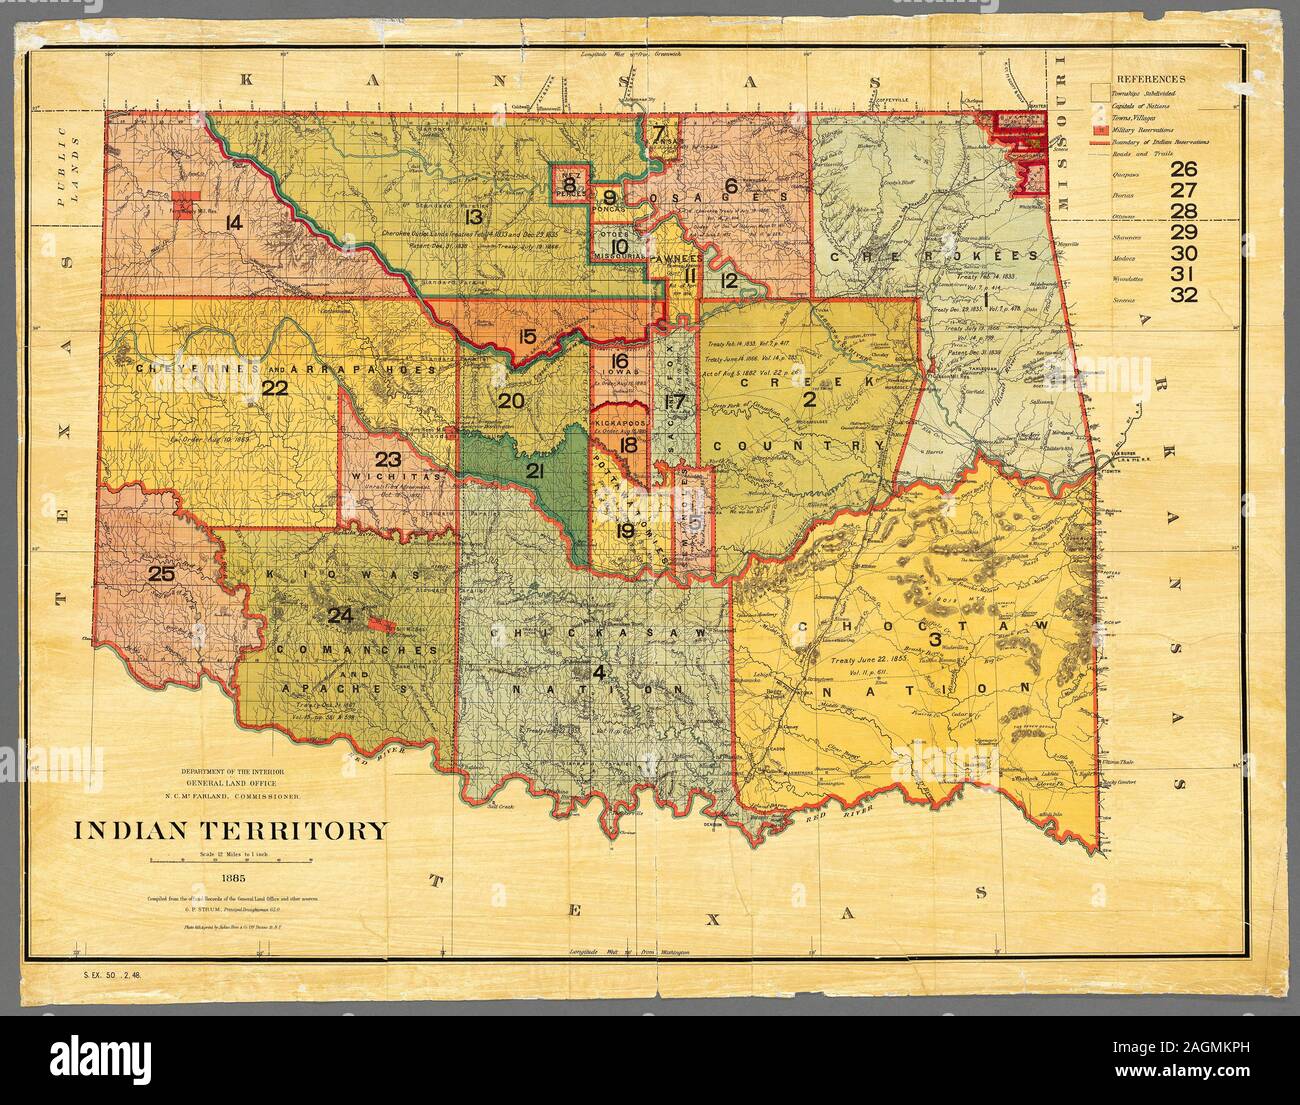 Map of Indian Territory (Oklahoma), 1885. Map produced by the Department of the Interior, General Land Office. Land designated as Indian Territory.  Map shows distribution of land designated for Native Americans before general settlement of the area. Stock Photo